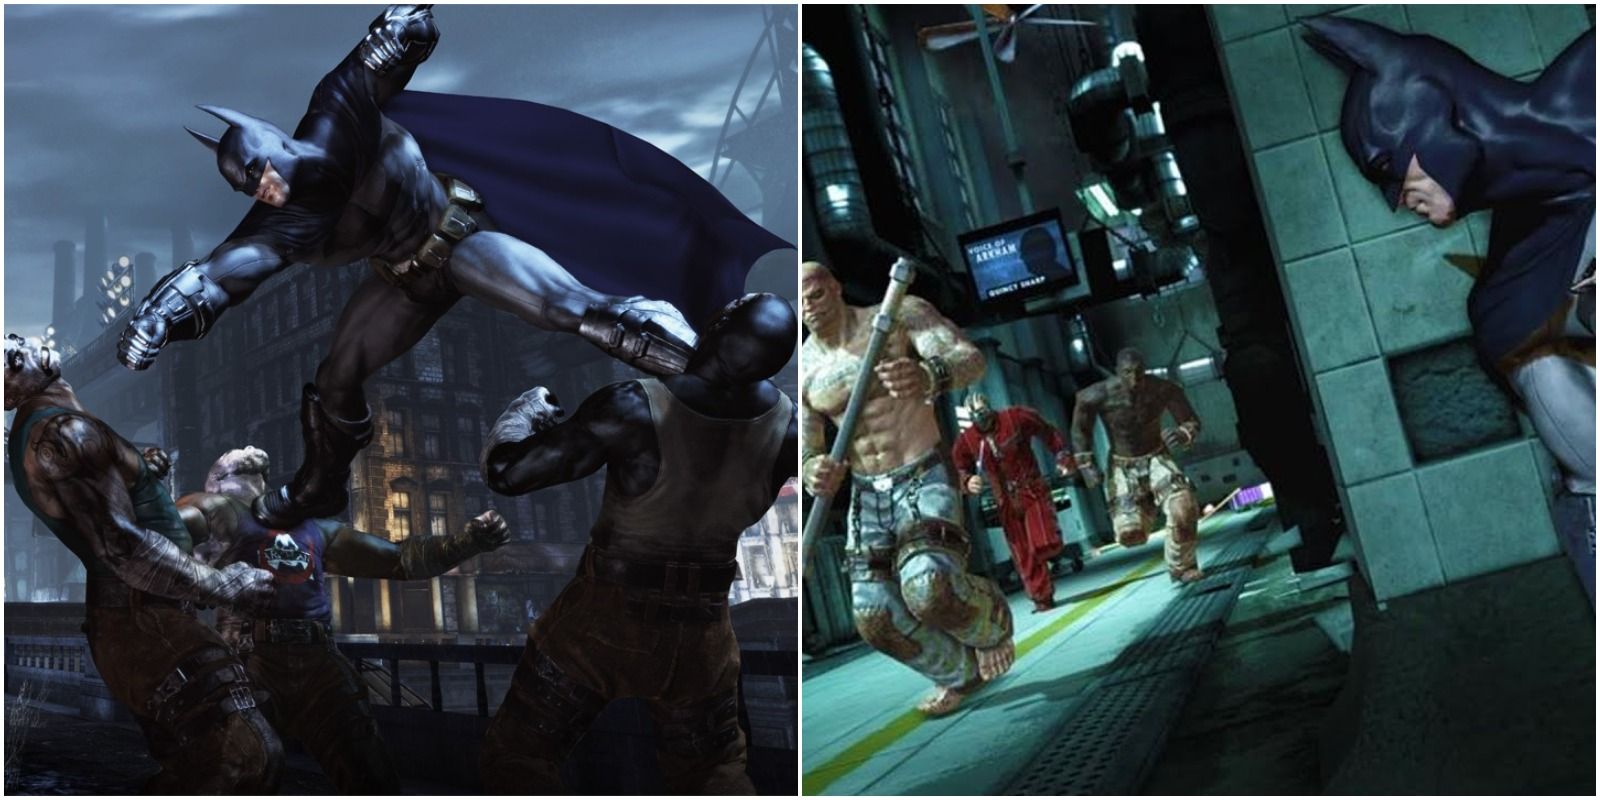 Free-flow and stealth combat were greatly evolved in Arkham City